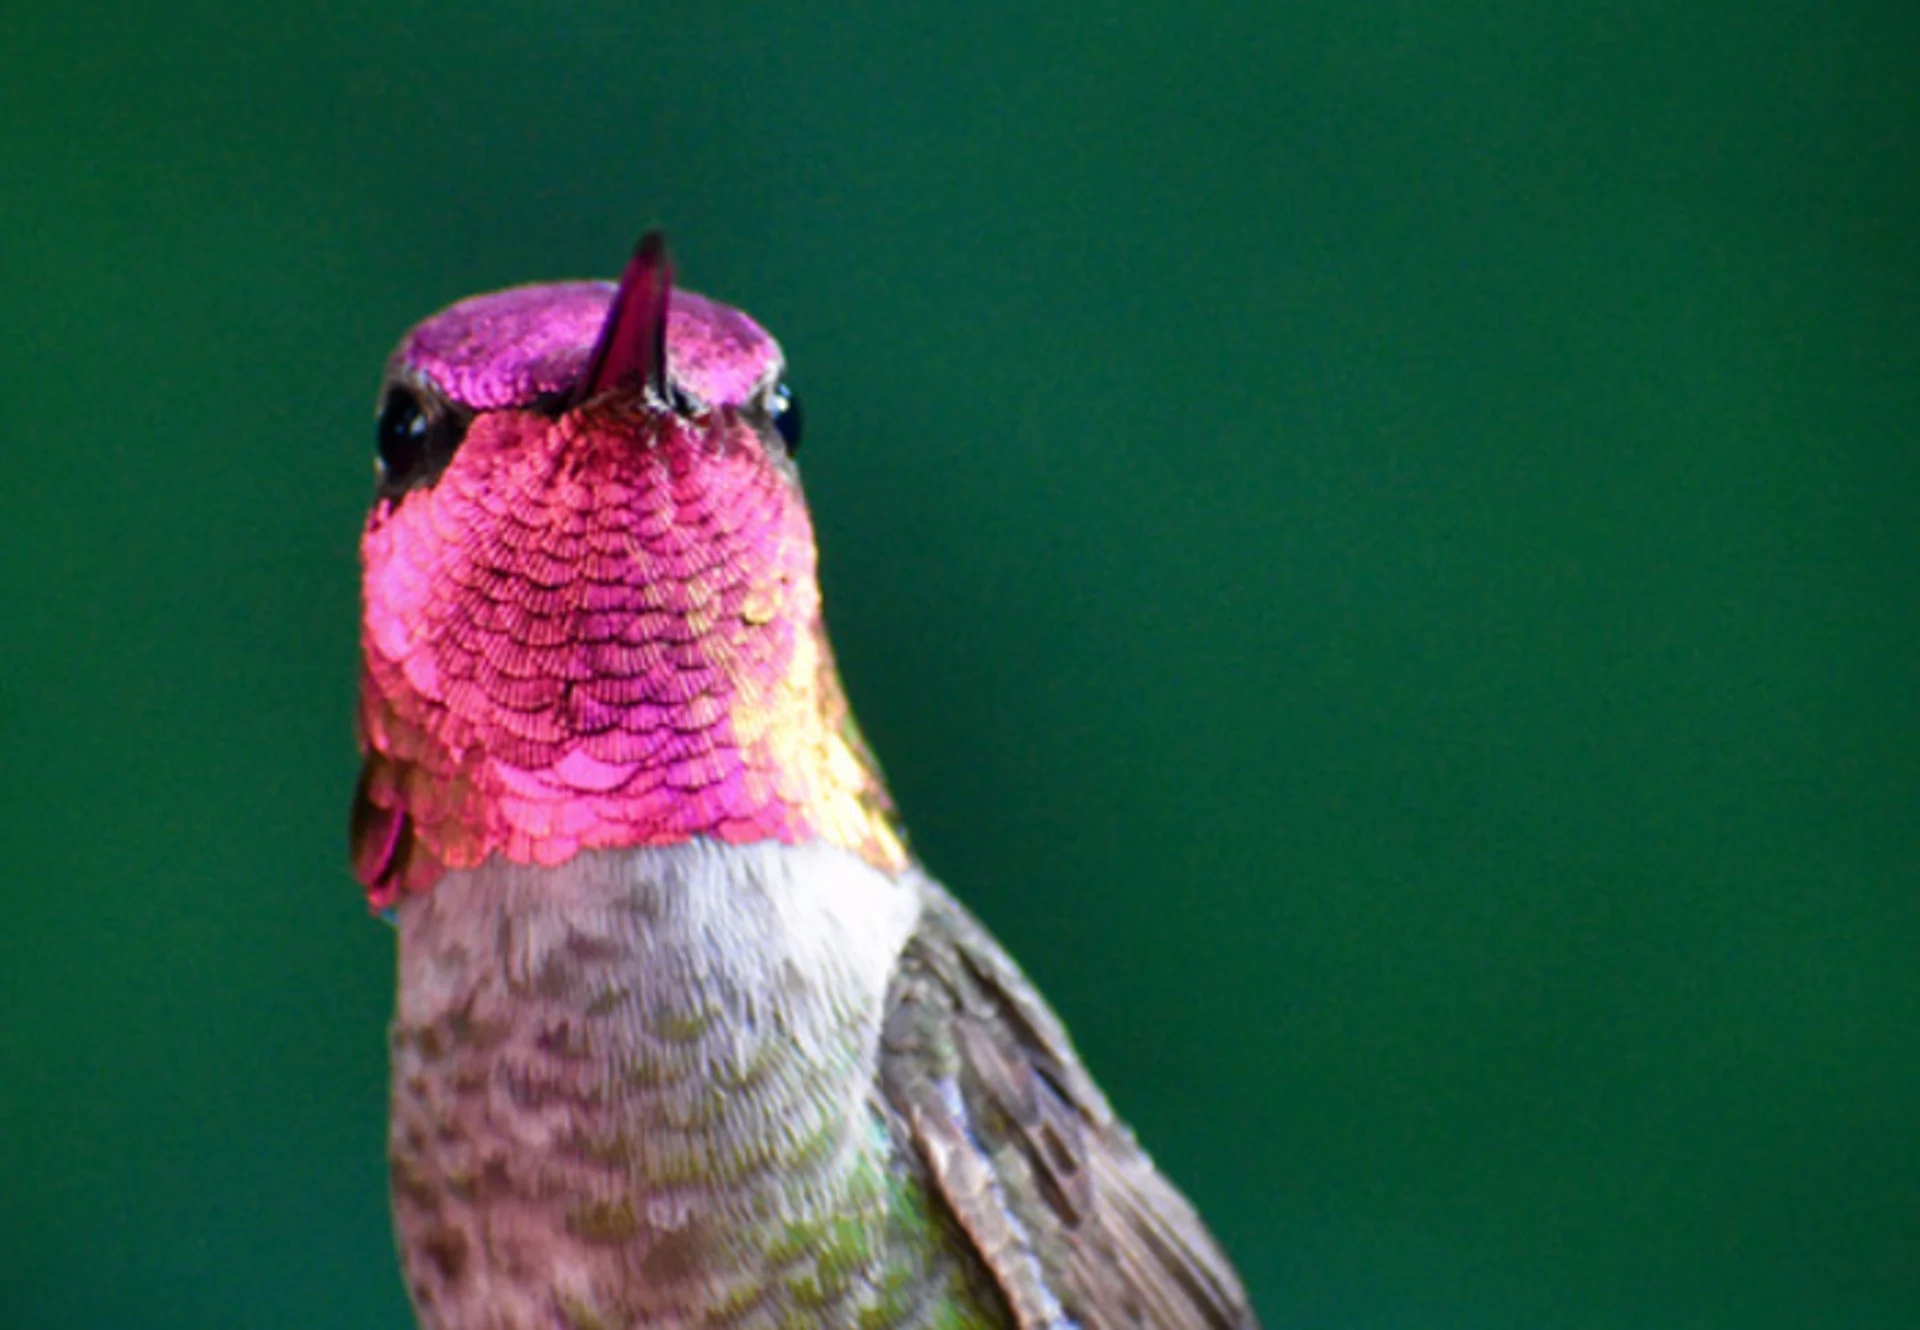 Hummingbirds are coming back. Here's how to attract them